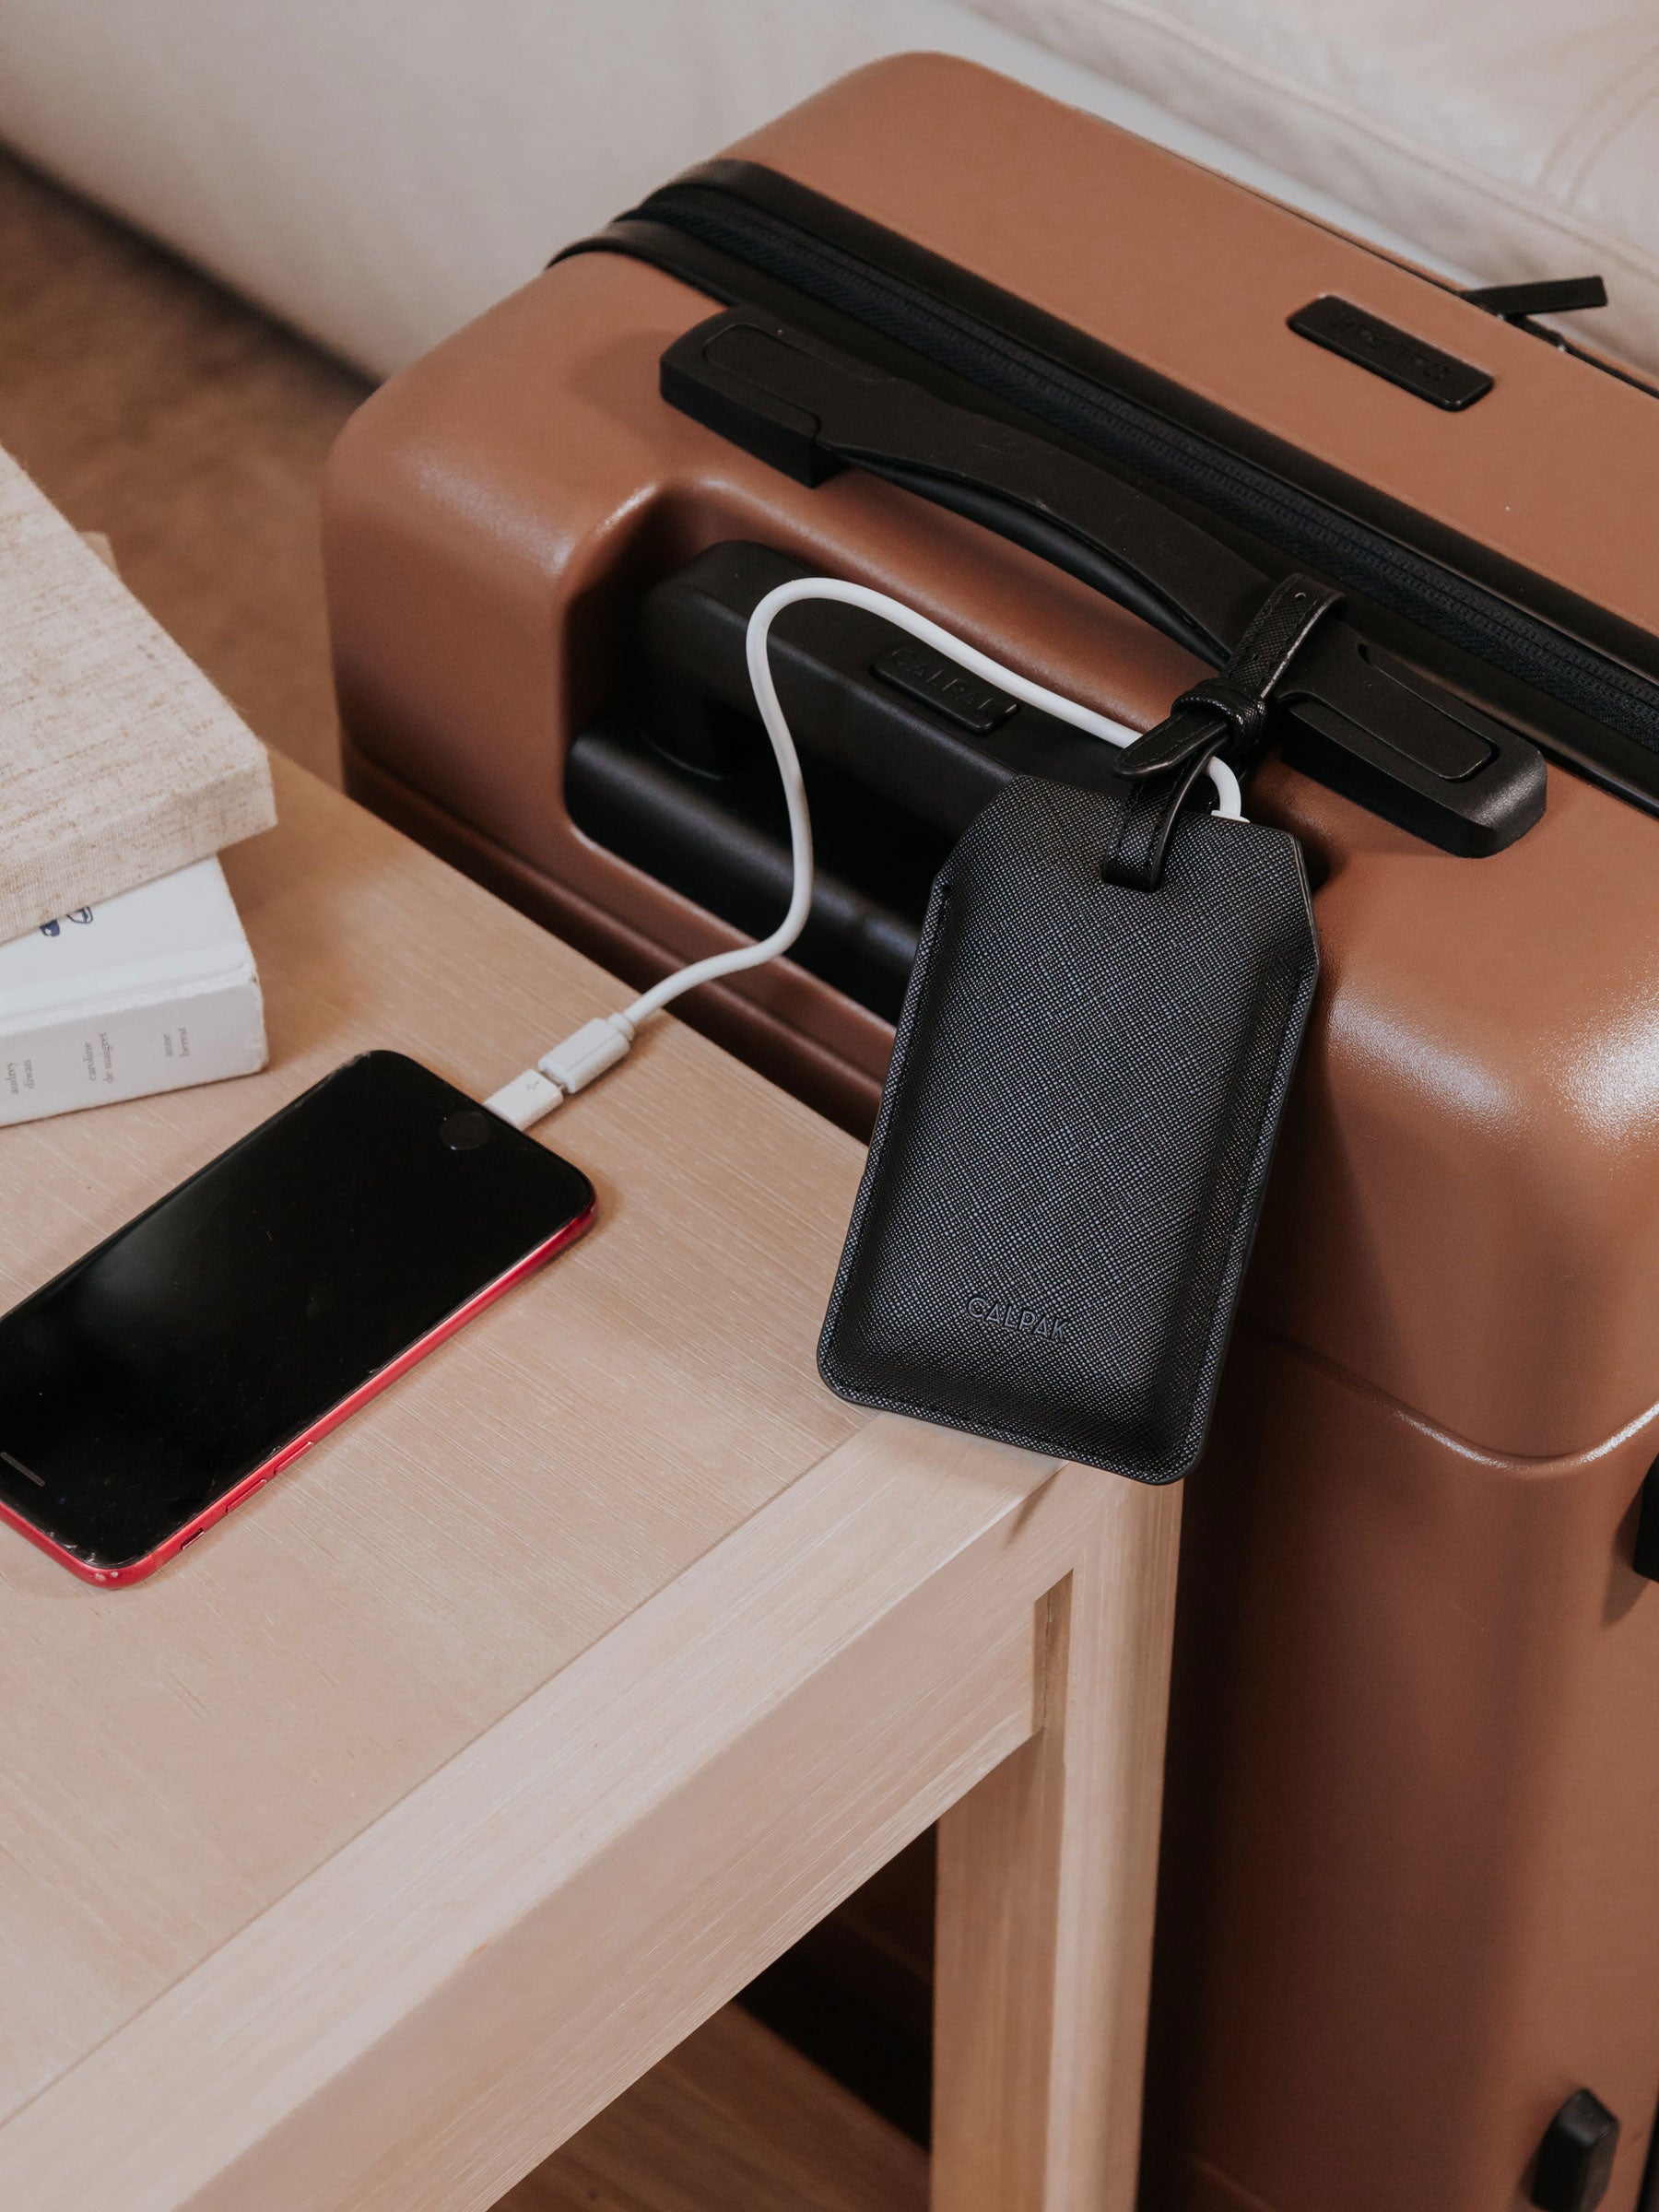 portable luggage tag charger on luggage